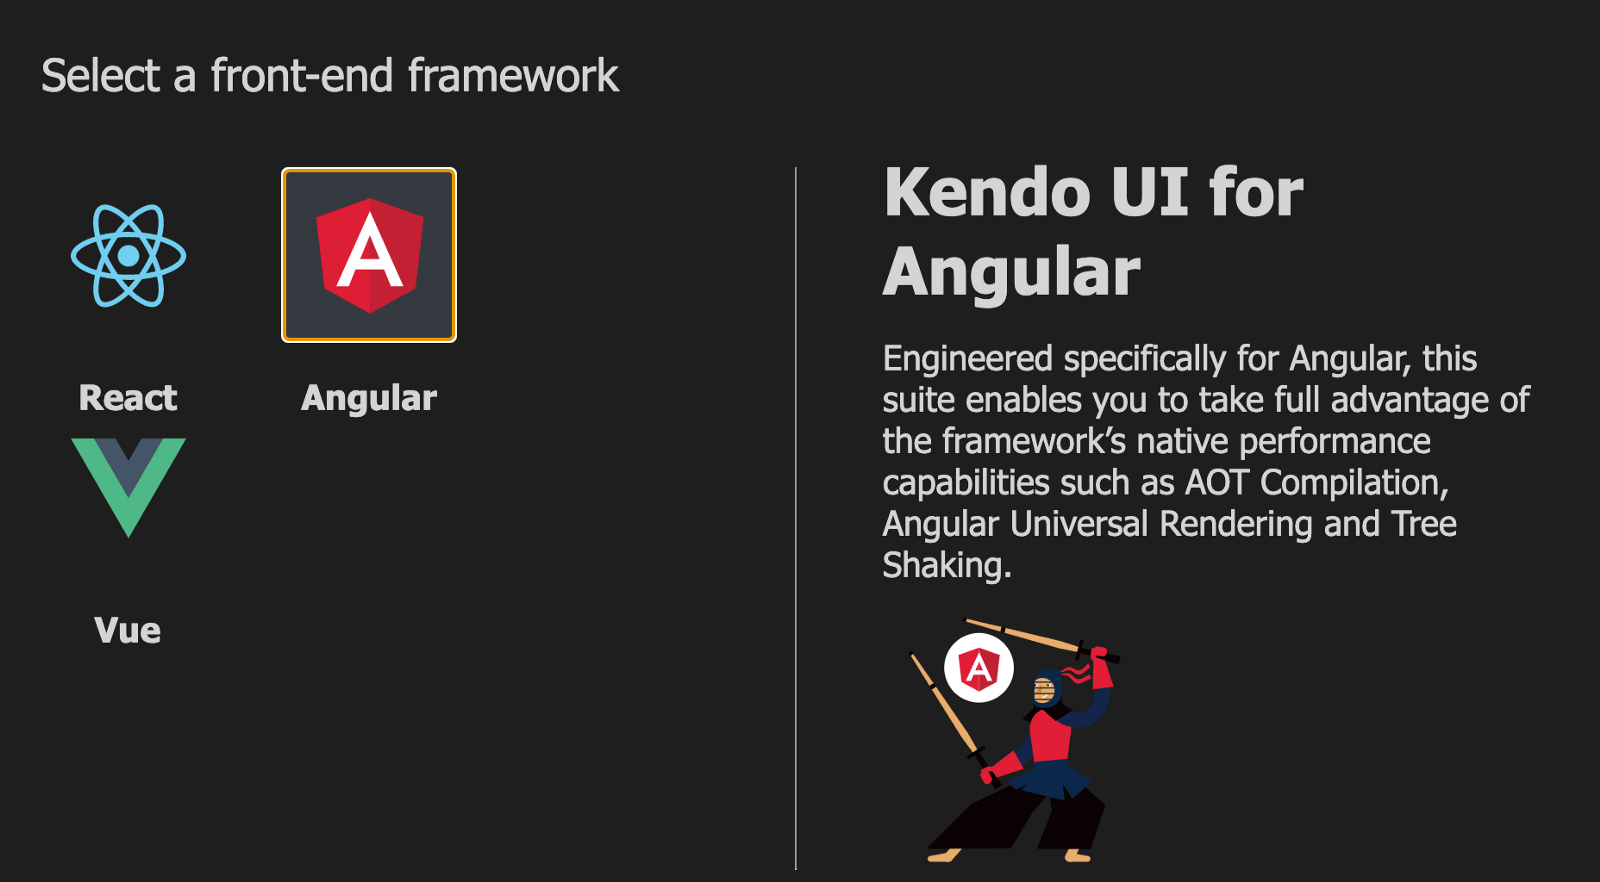 Select a front-end framework. We have selected Angular; other options are React and Vue. The right side says Kendo UI for Angular: ‘Engineered specifically for Angular, this suite enables you to take full advantage of the framework’s native performance capabilities such as AOT Compilation, Angular Universal Rendering and Tree Shaking.’